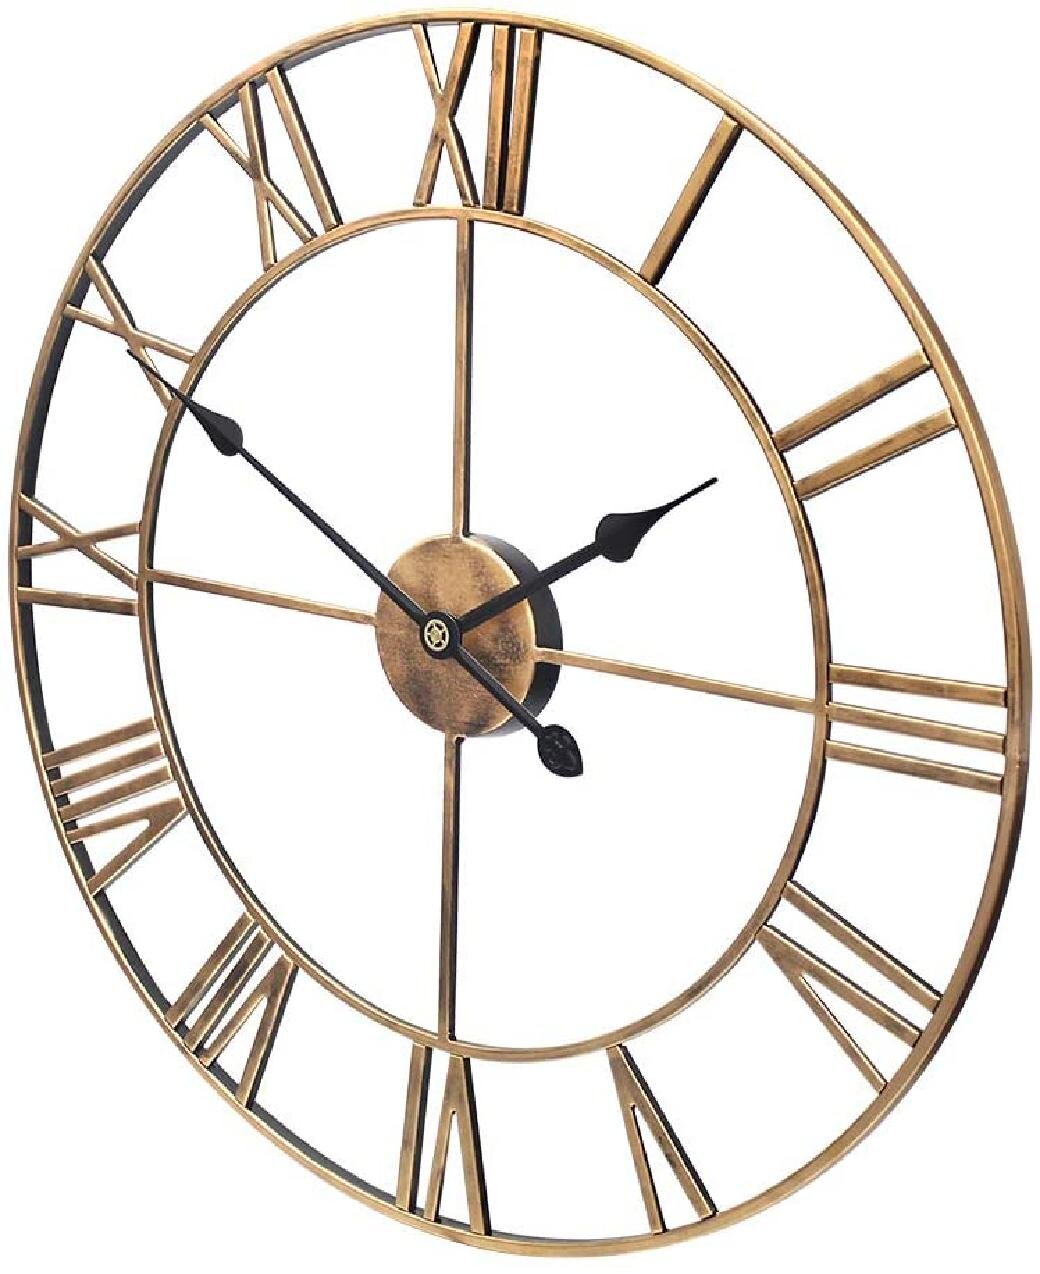 Concrete Wall Clock Copper Accents Handmade Wall Decor Office Clock Industrial Style Chic Loft Home Decor Wood Clock Kitchen Clock